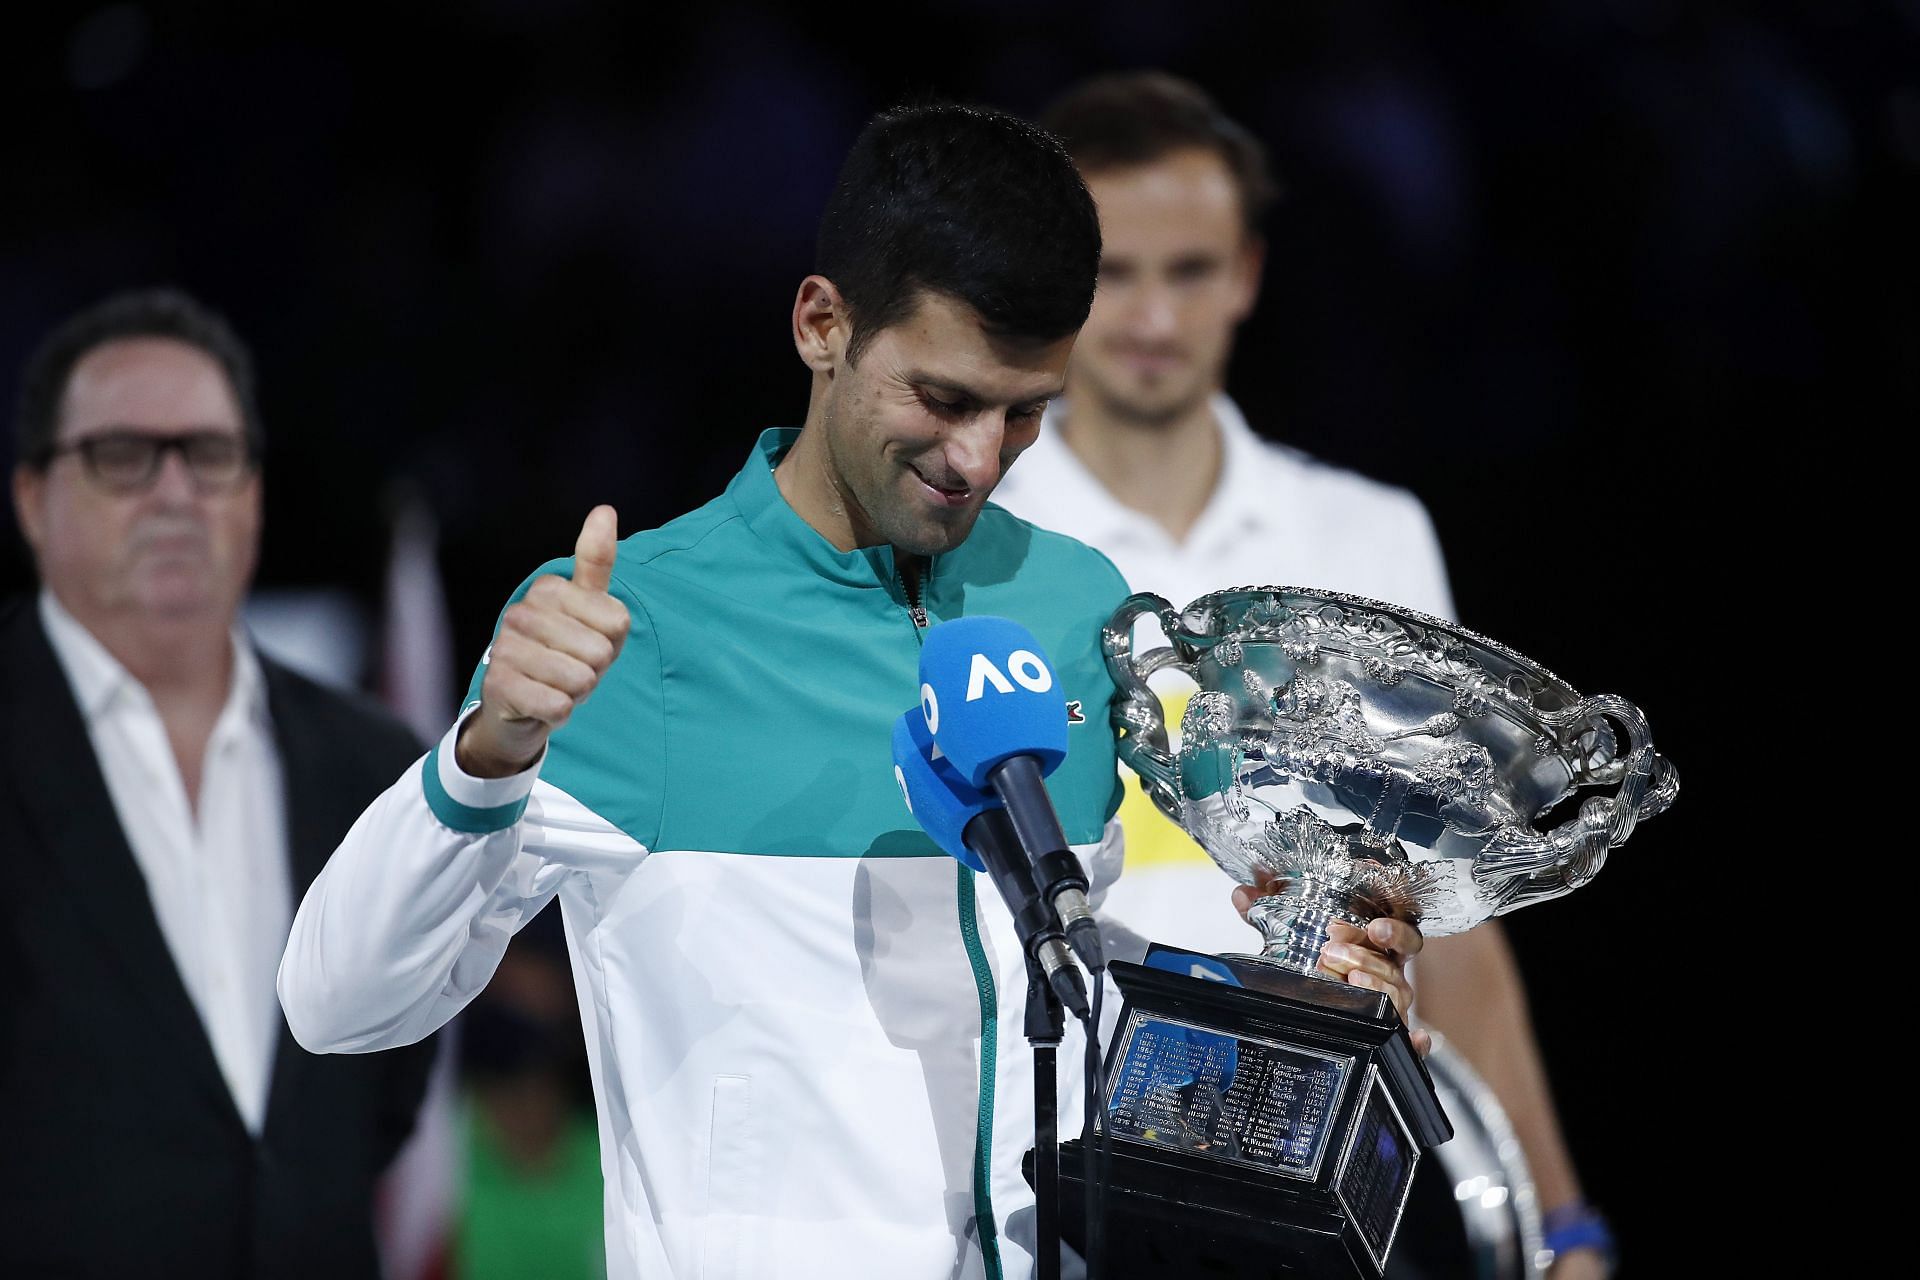 Novak Djokovic is yet to confirm his participation at the Australian Open 2022